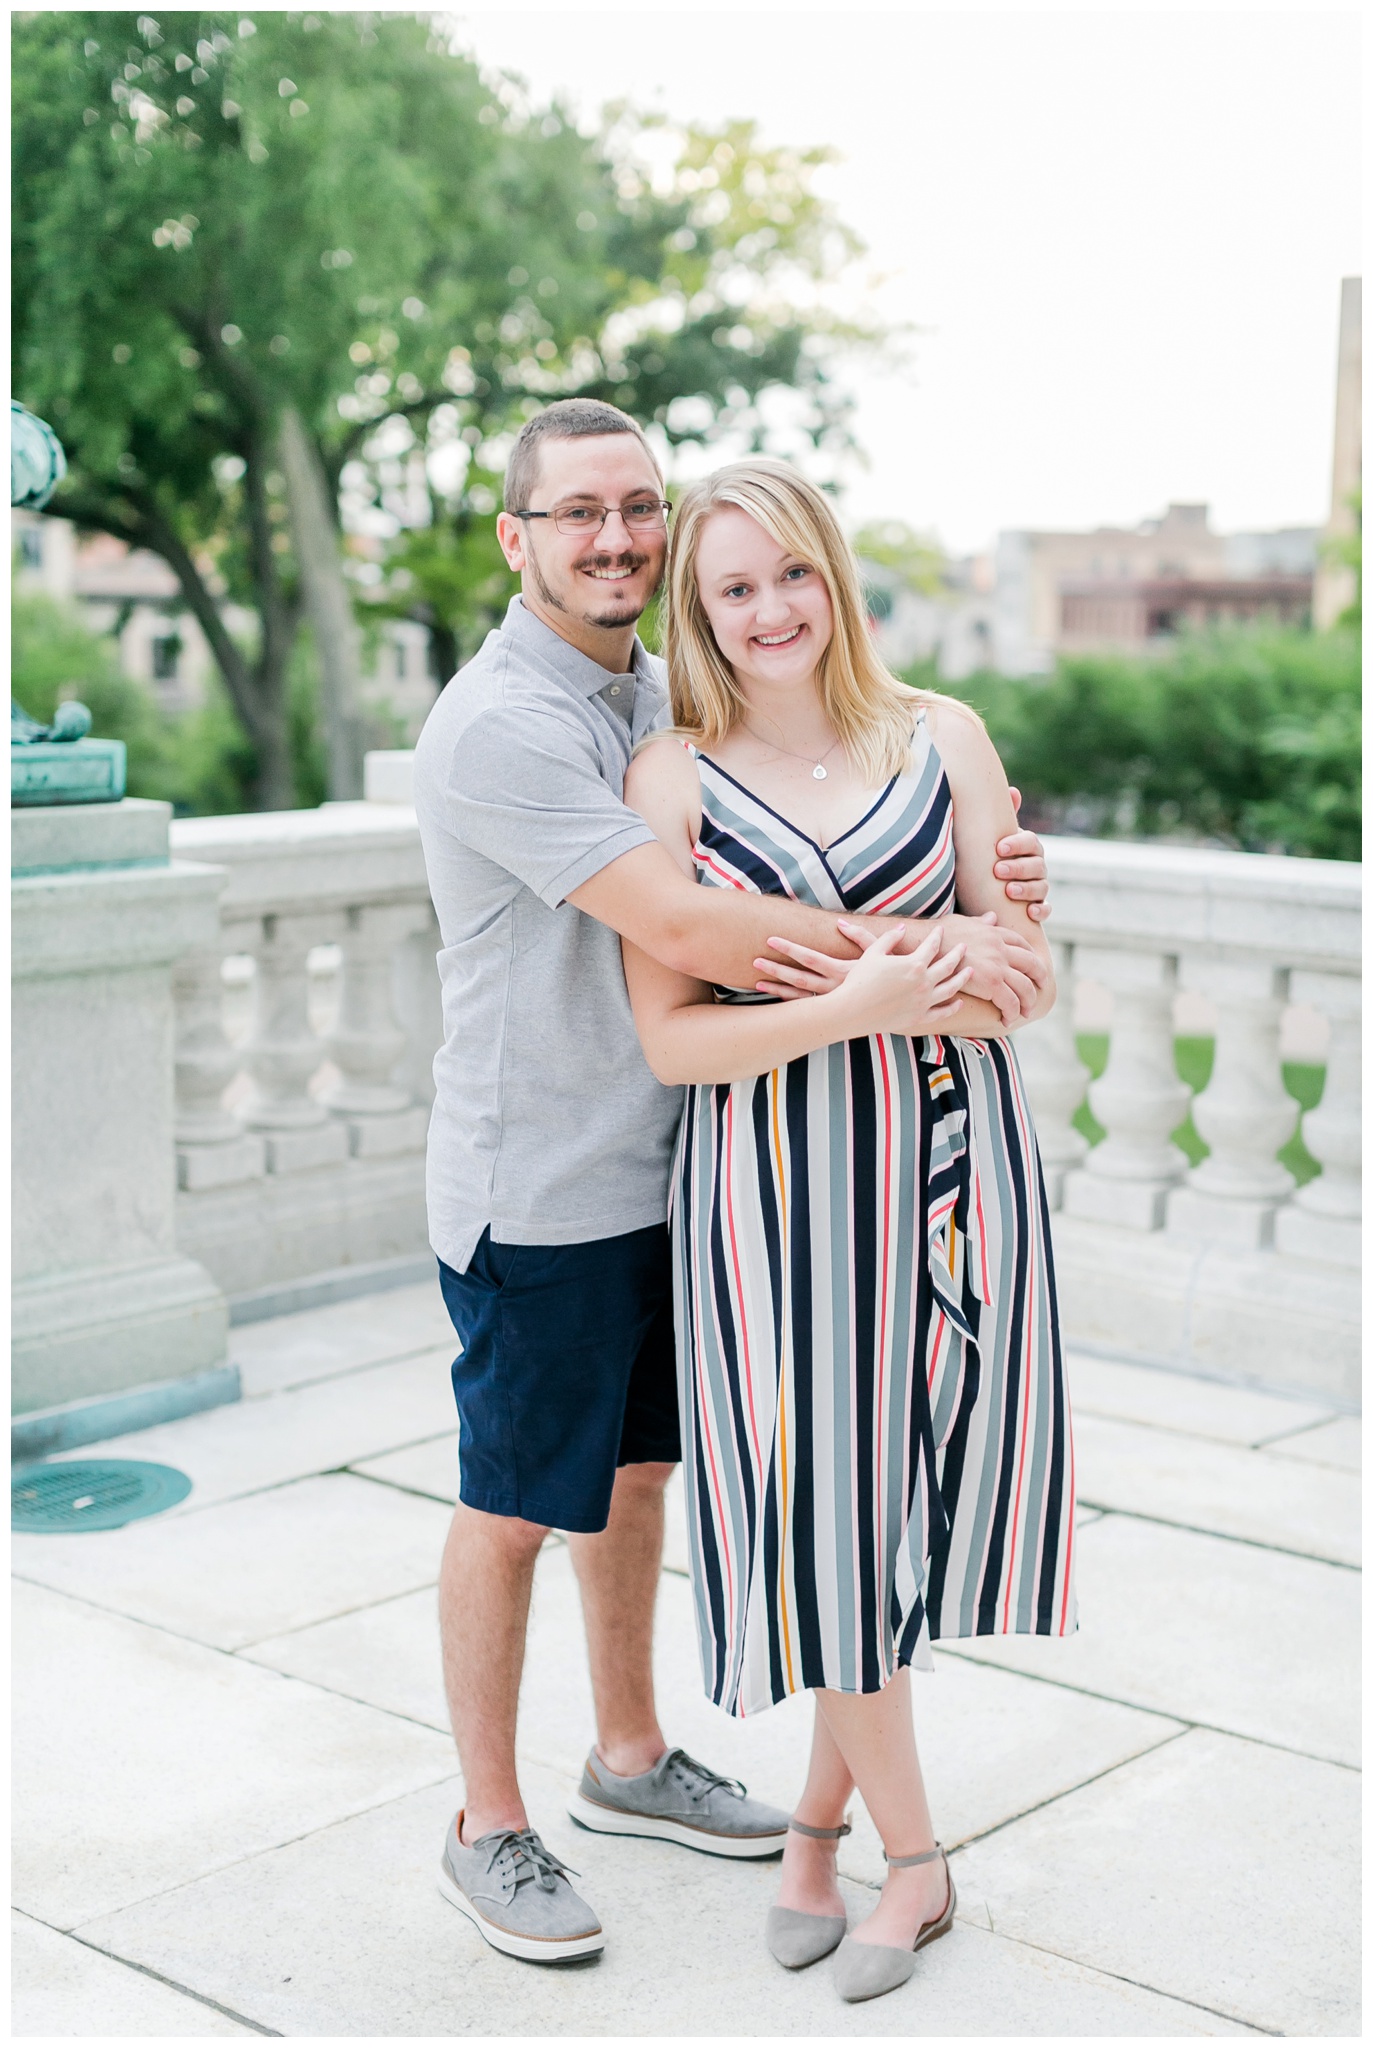 Downtown_madison_wisconsin_engagement_session_4219.jpg